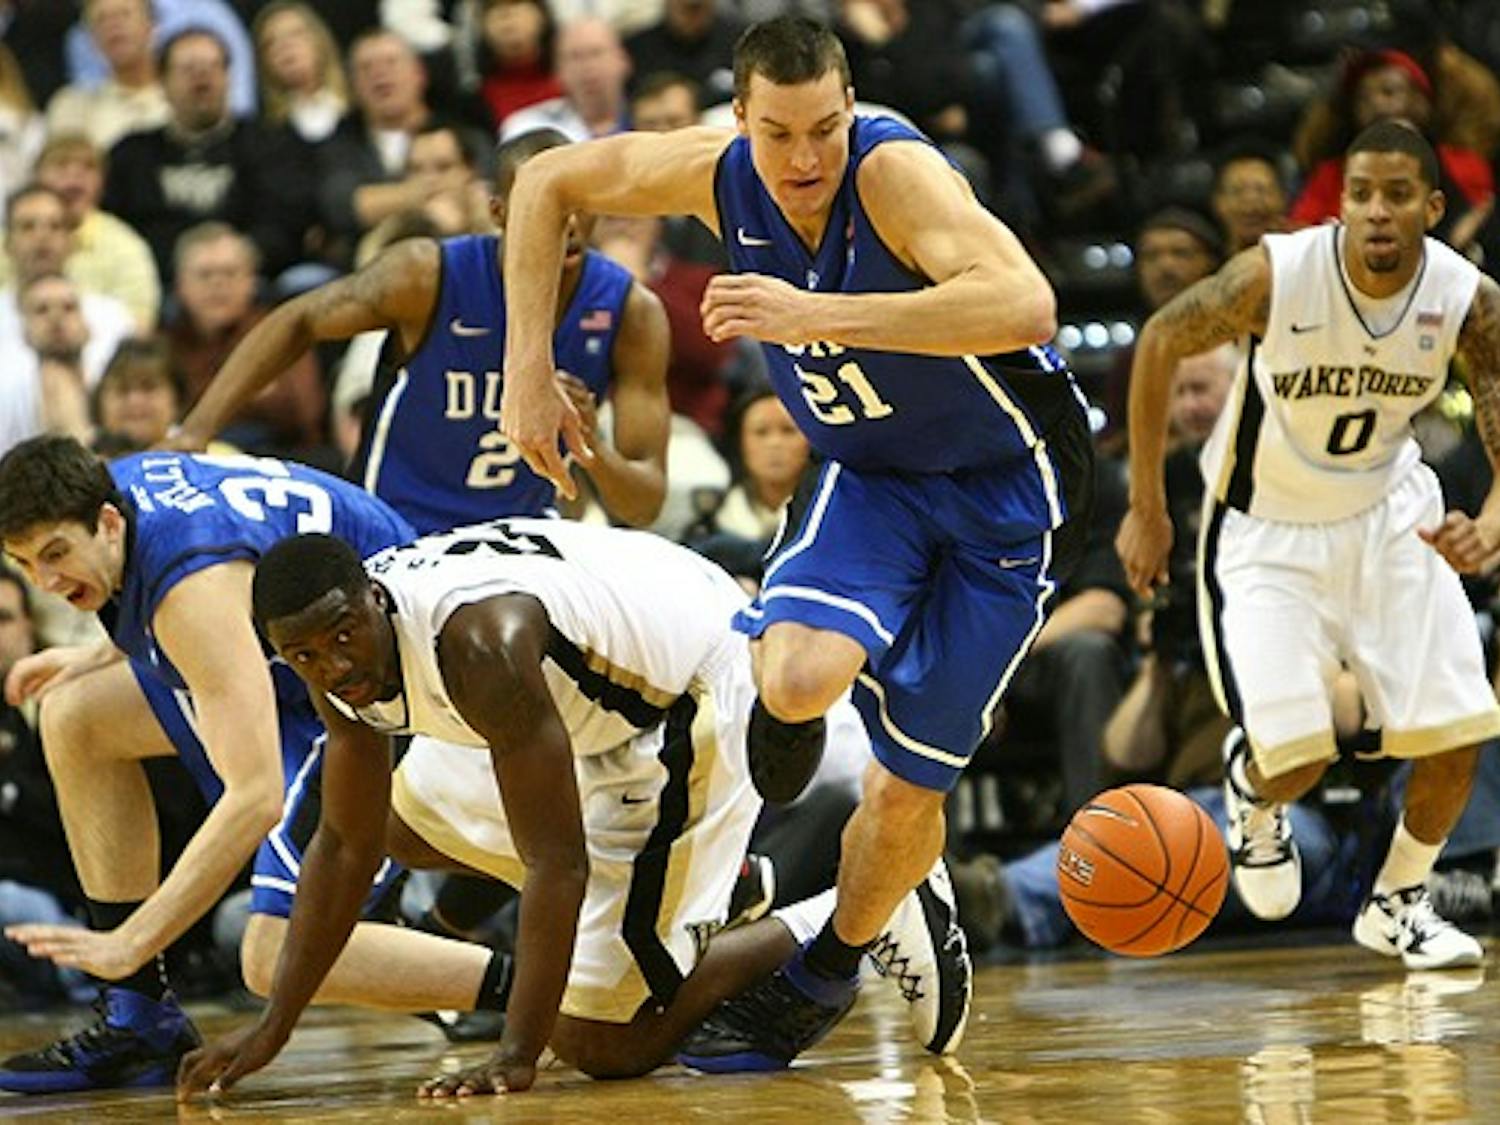 Miles Plumlee sparked the Blue Devils’ second half run with tenacious defense. The forward also had eight points